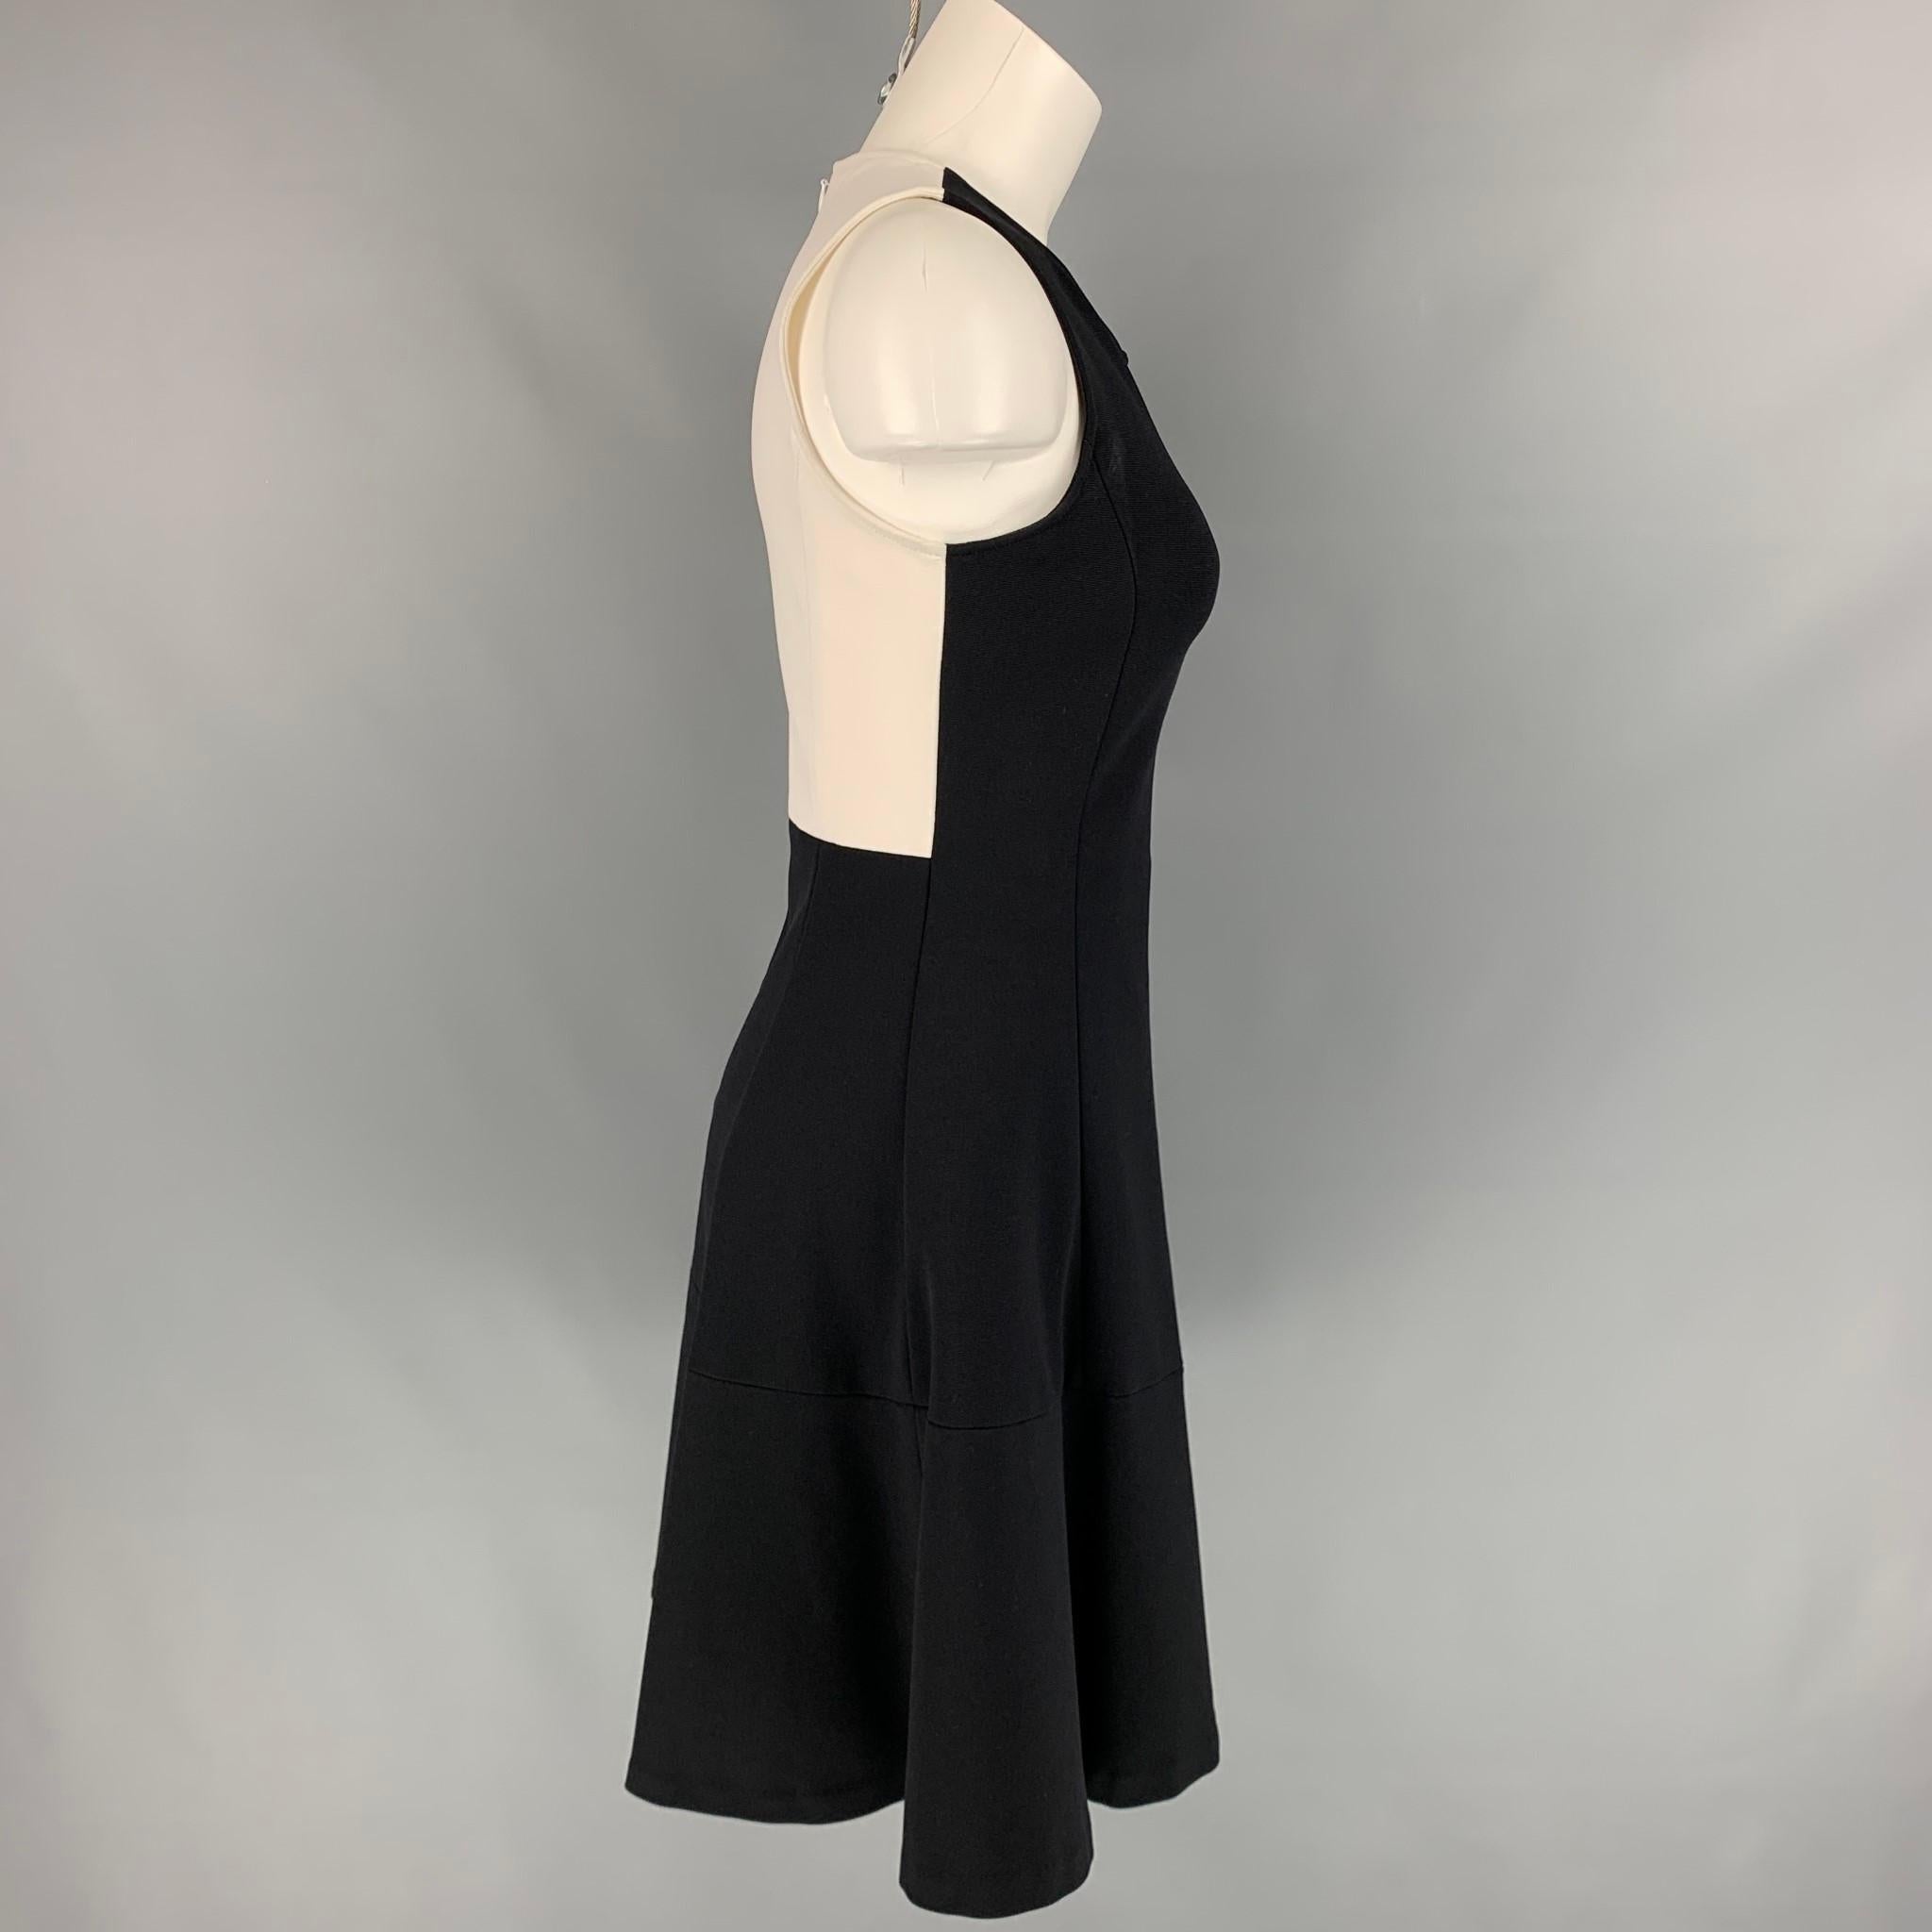 LISA PERRY x BARNEY'S NEW YORK dress comes in a black & white color block polyamide featuring a sleeveless style, a-line, and a back zipper closure. 

Very Good Pre-Owned Condition.
Marked: 2

Measurements:

Shoulder: 12 in.
Bust: 30 in.
Waist: 26